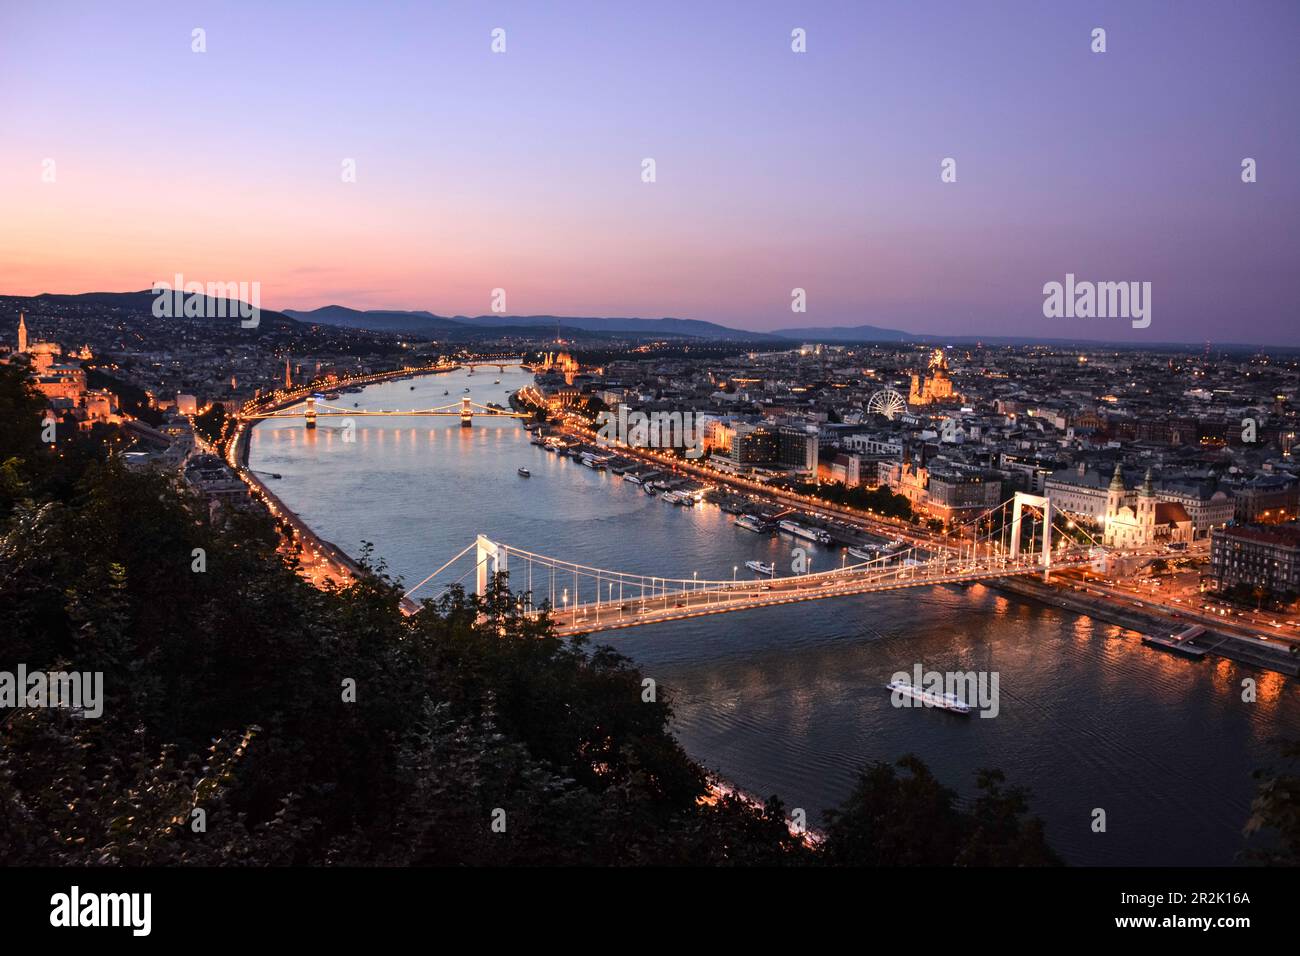 The Danube River and Budapest Cityscape Seen from the Citadella at Dusk - Hungary Stock Photo